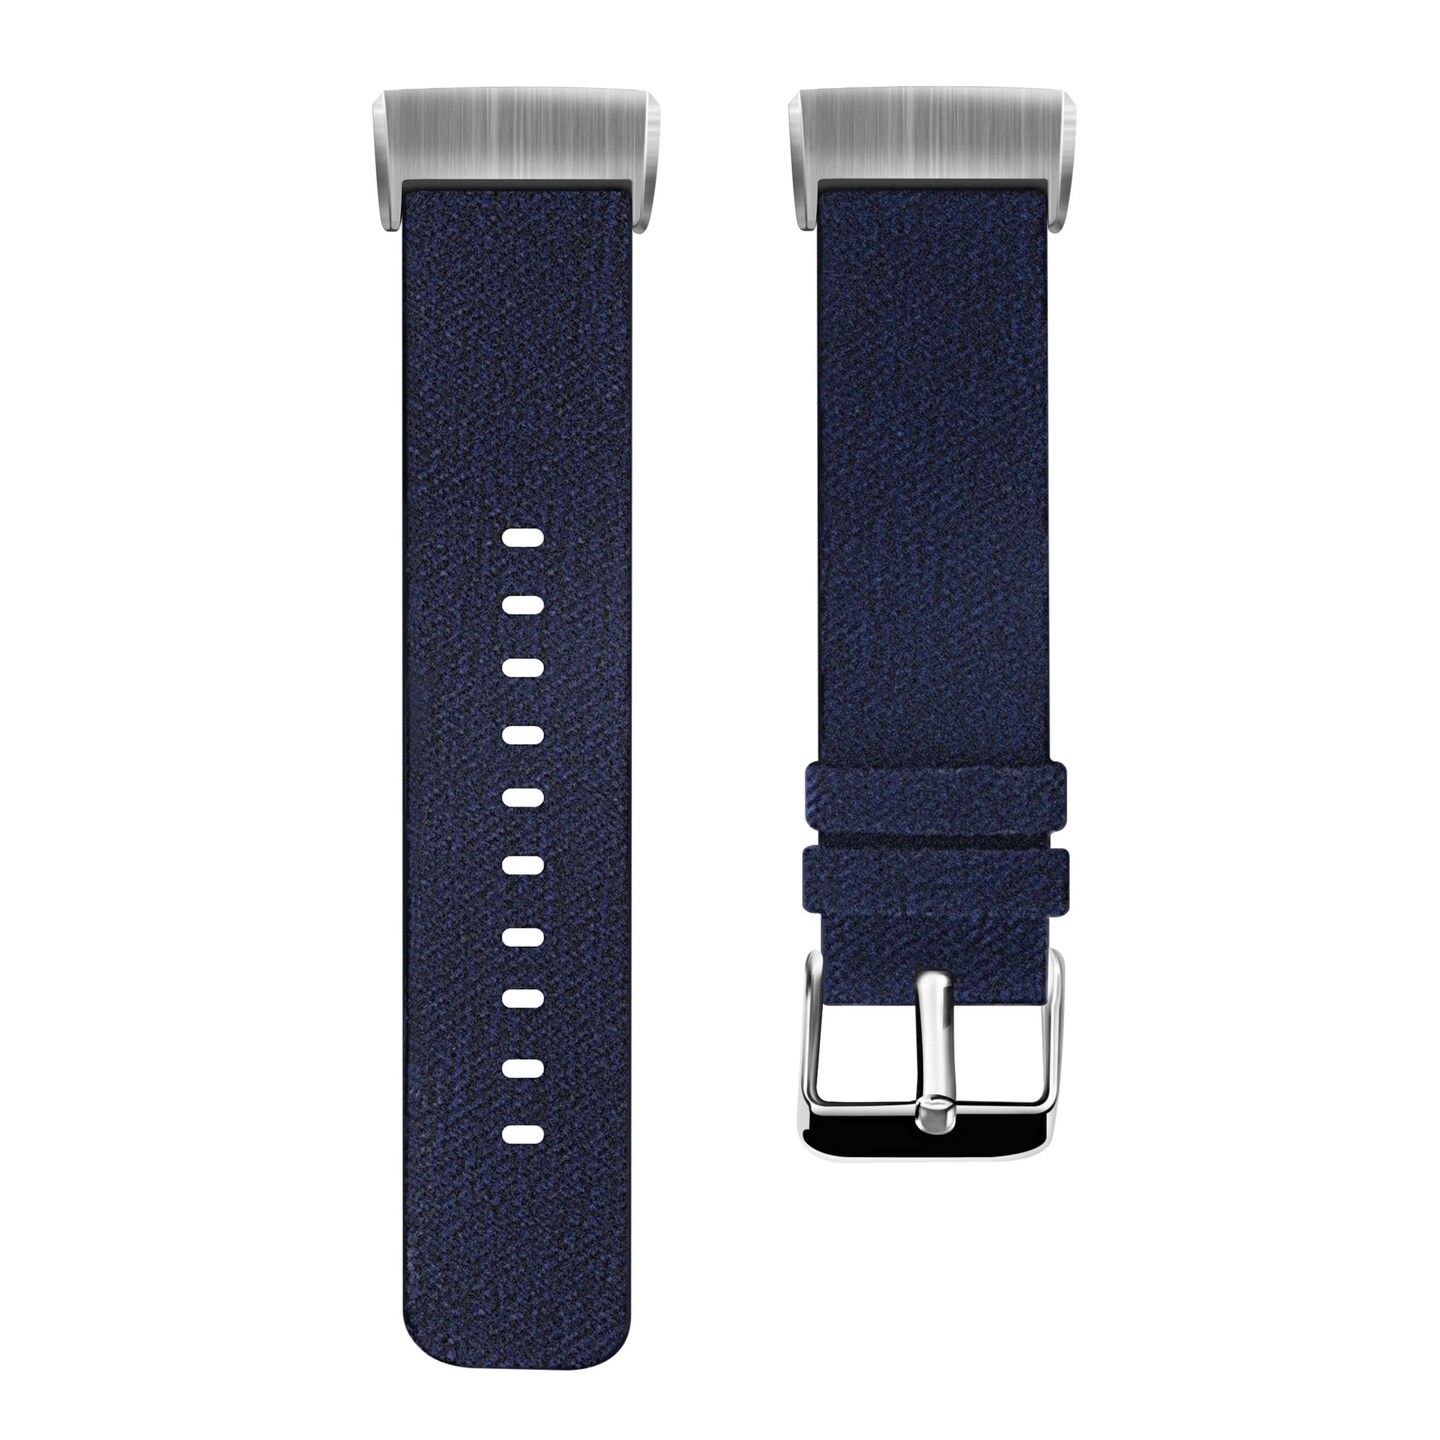 Insten Fabric Watch Band Compatible with Fitbit Charge 3, Charge 3 SE, Charge 4, and Charge 4 SE, Fitness Tracker Replacement Bands for Men and Women, Navy Blue